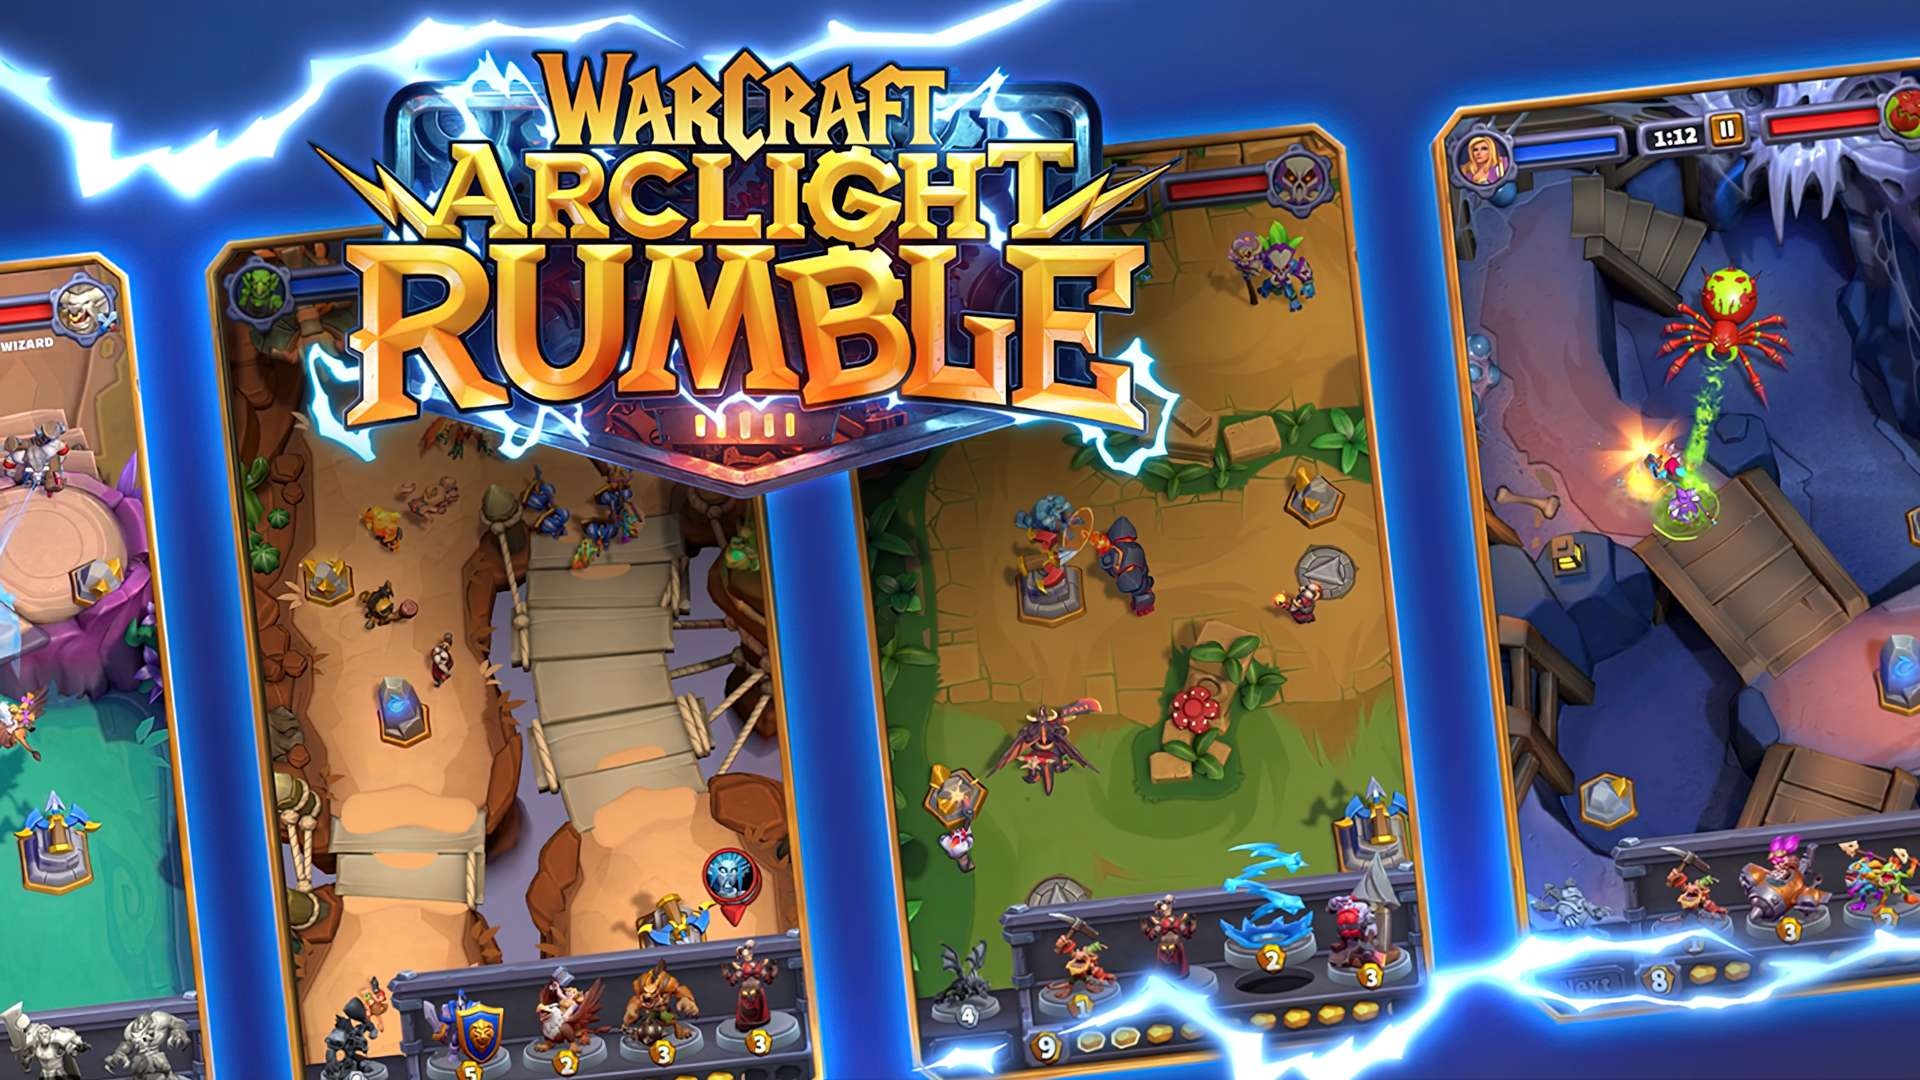 Warcraft Arclight Rumble: Each of maps has a boss with a specific mechanic that players must find a way around. 1920x1080 Full HD Background.